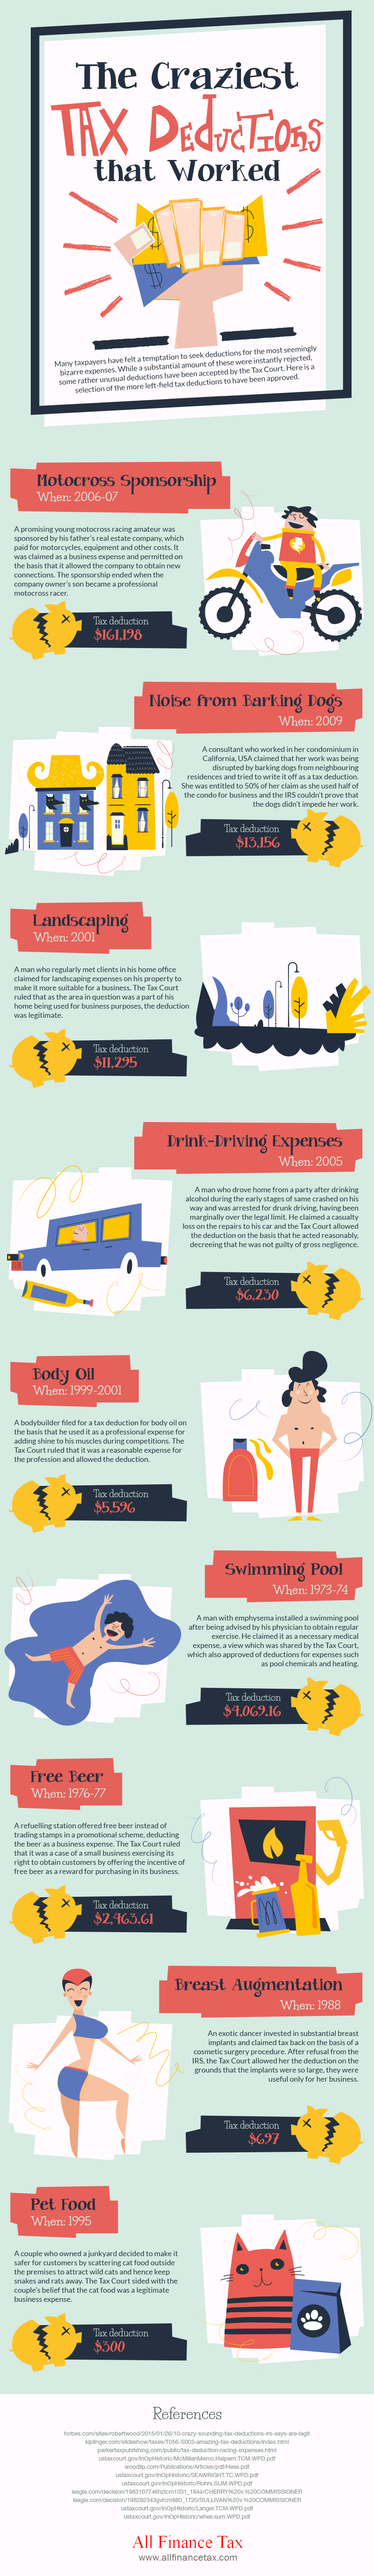 the-craziest-tax-deductions-that-worked-infographic